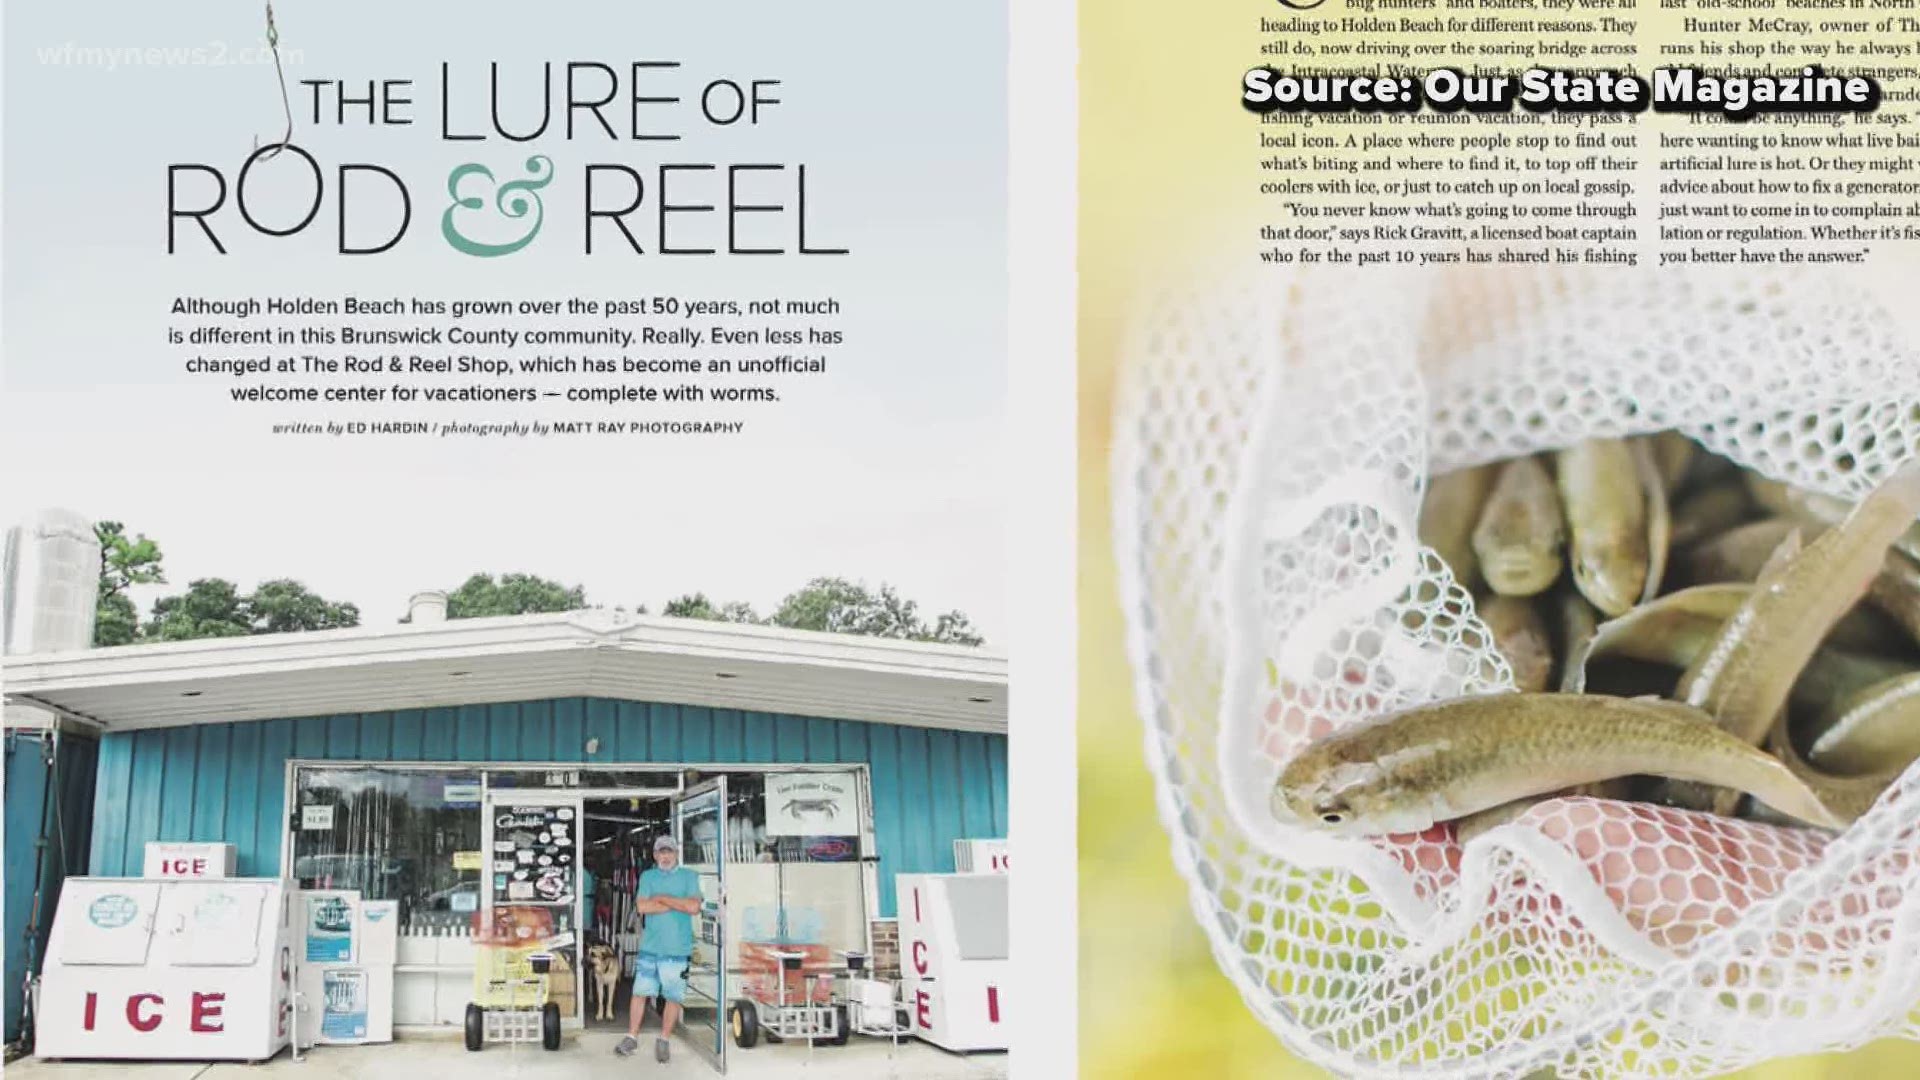 Our State Magazine’s Summer Coastal issue is out and it has a variety of ideas for families.